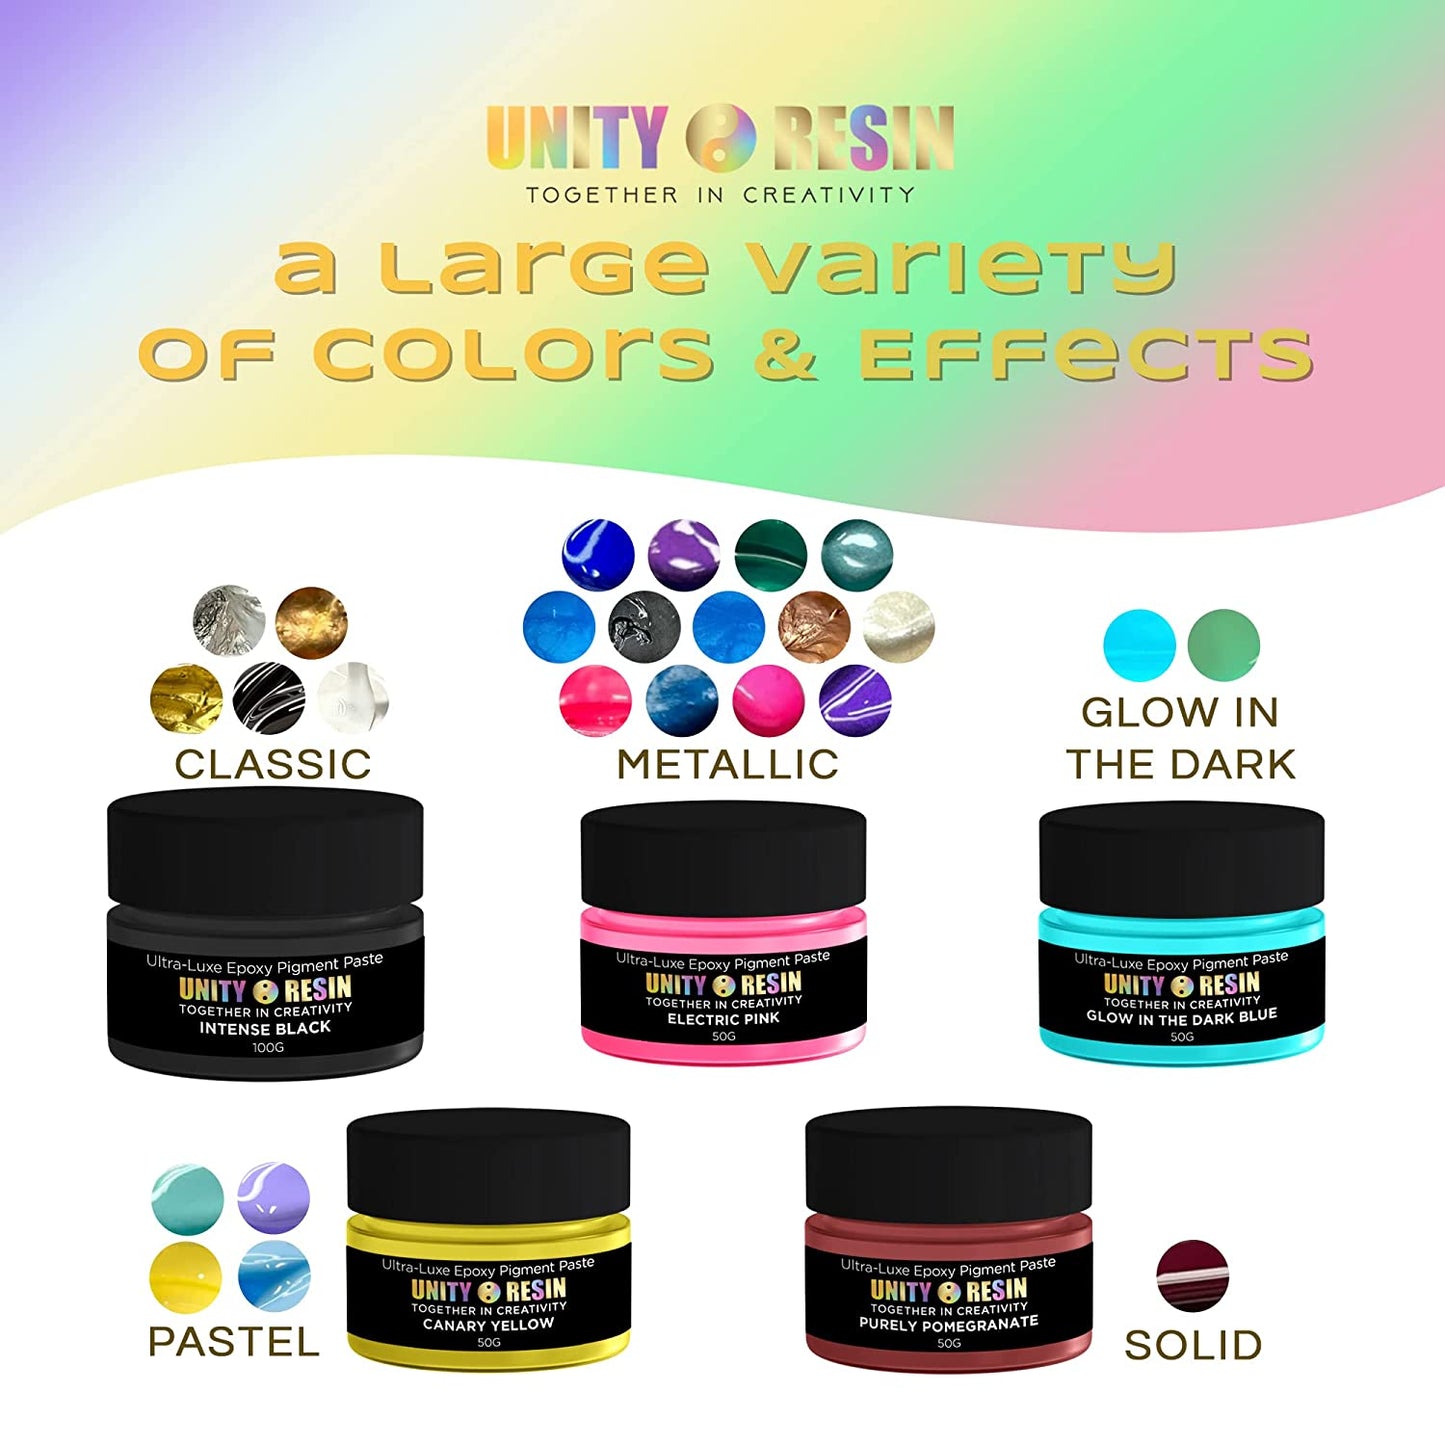 Ultra-Luxe Epoxy Resin Pigment Paste- GLOW in the DARK BLUE (50G).